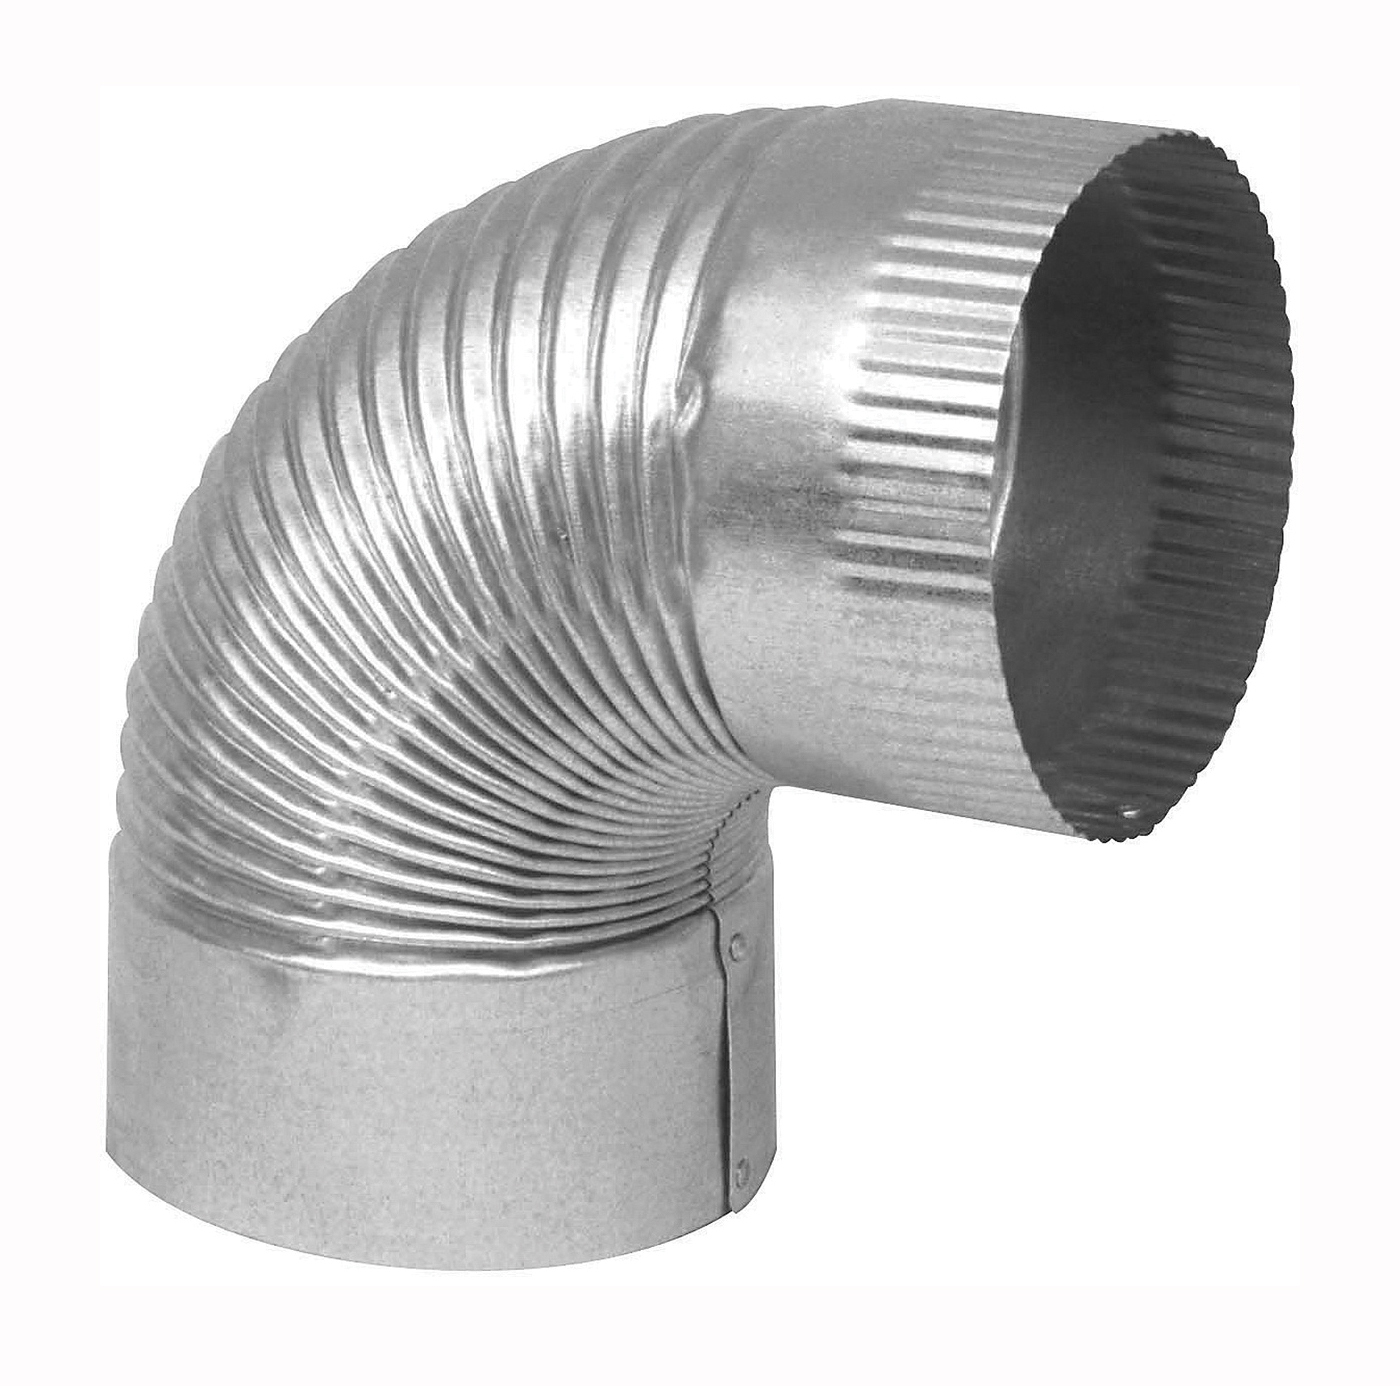 GV0328 Corrugated Elbow, 7 in Connection, 28 Gauge, Galvanized